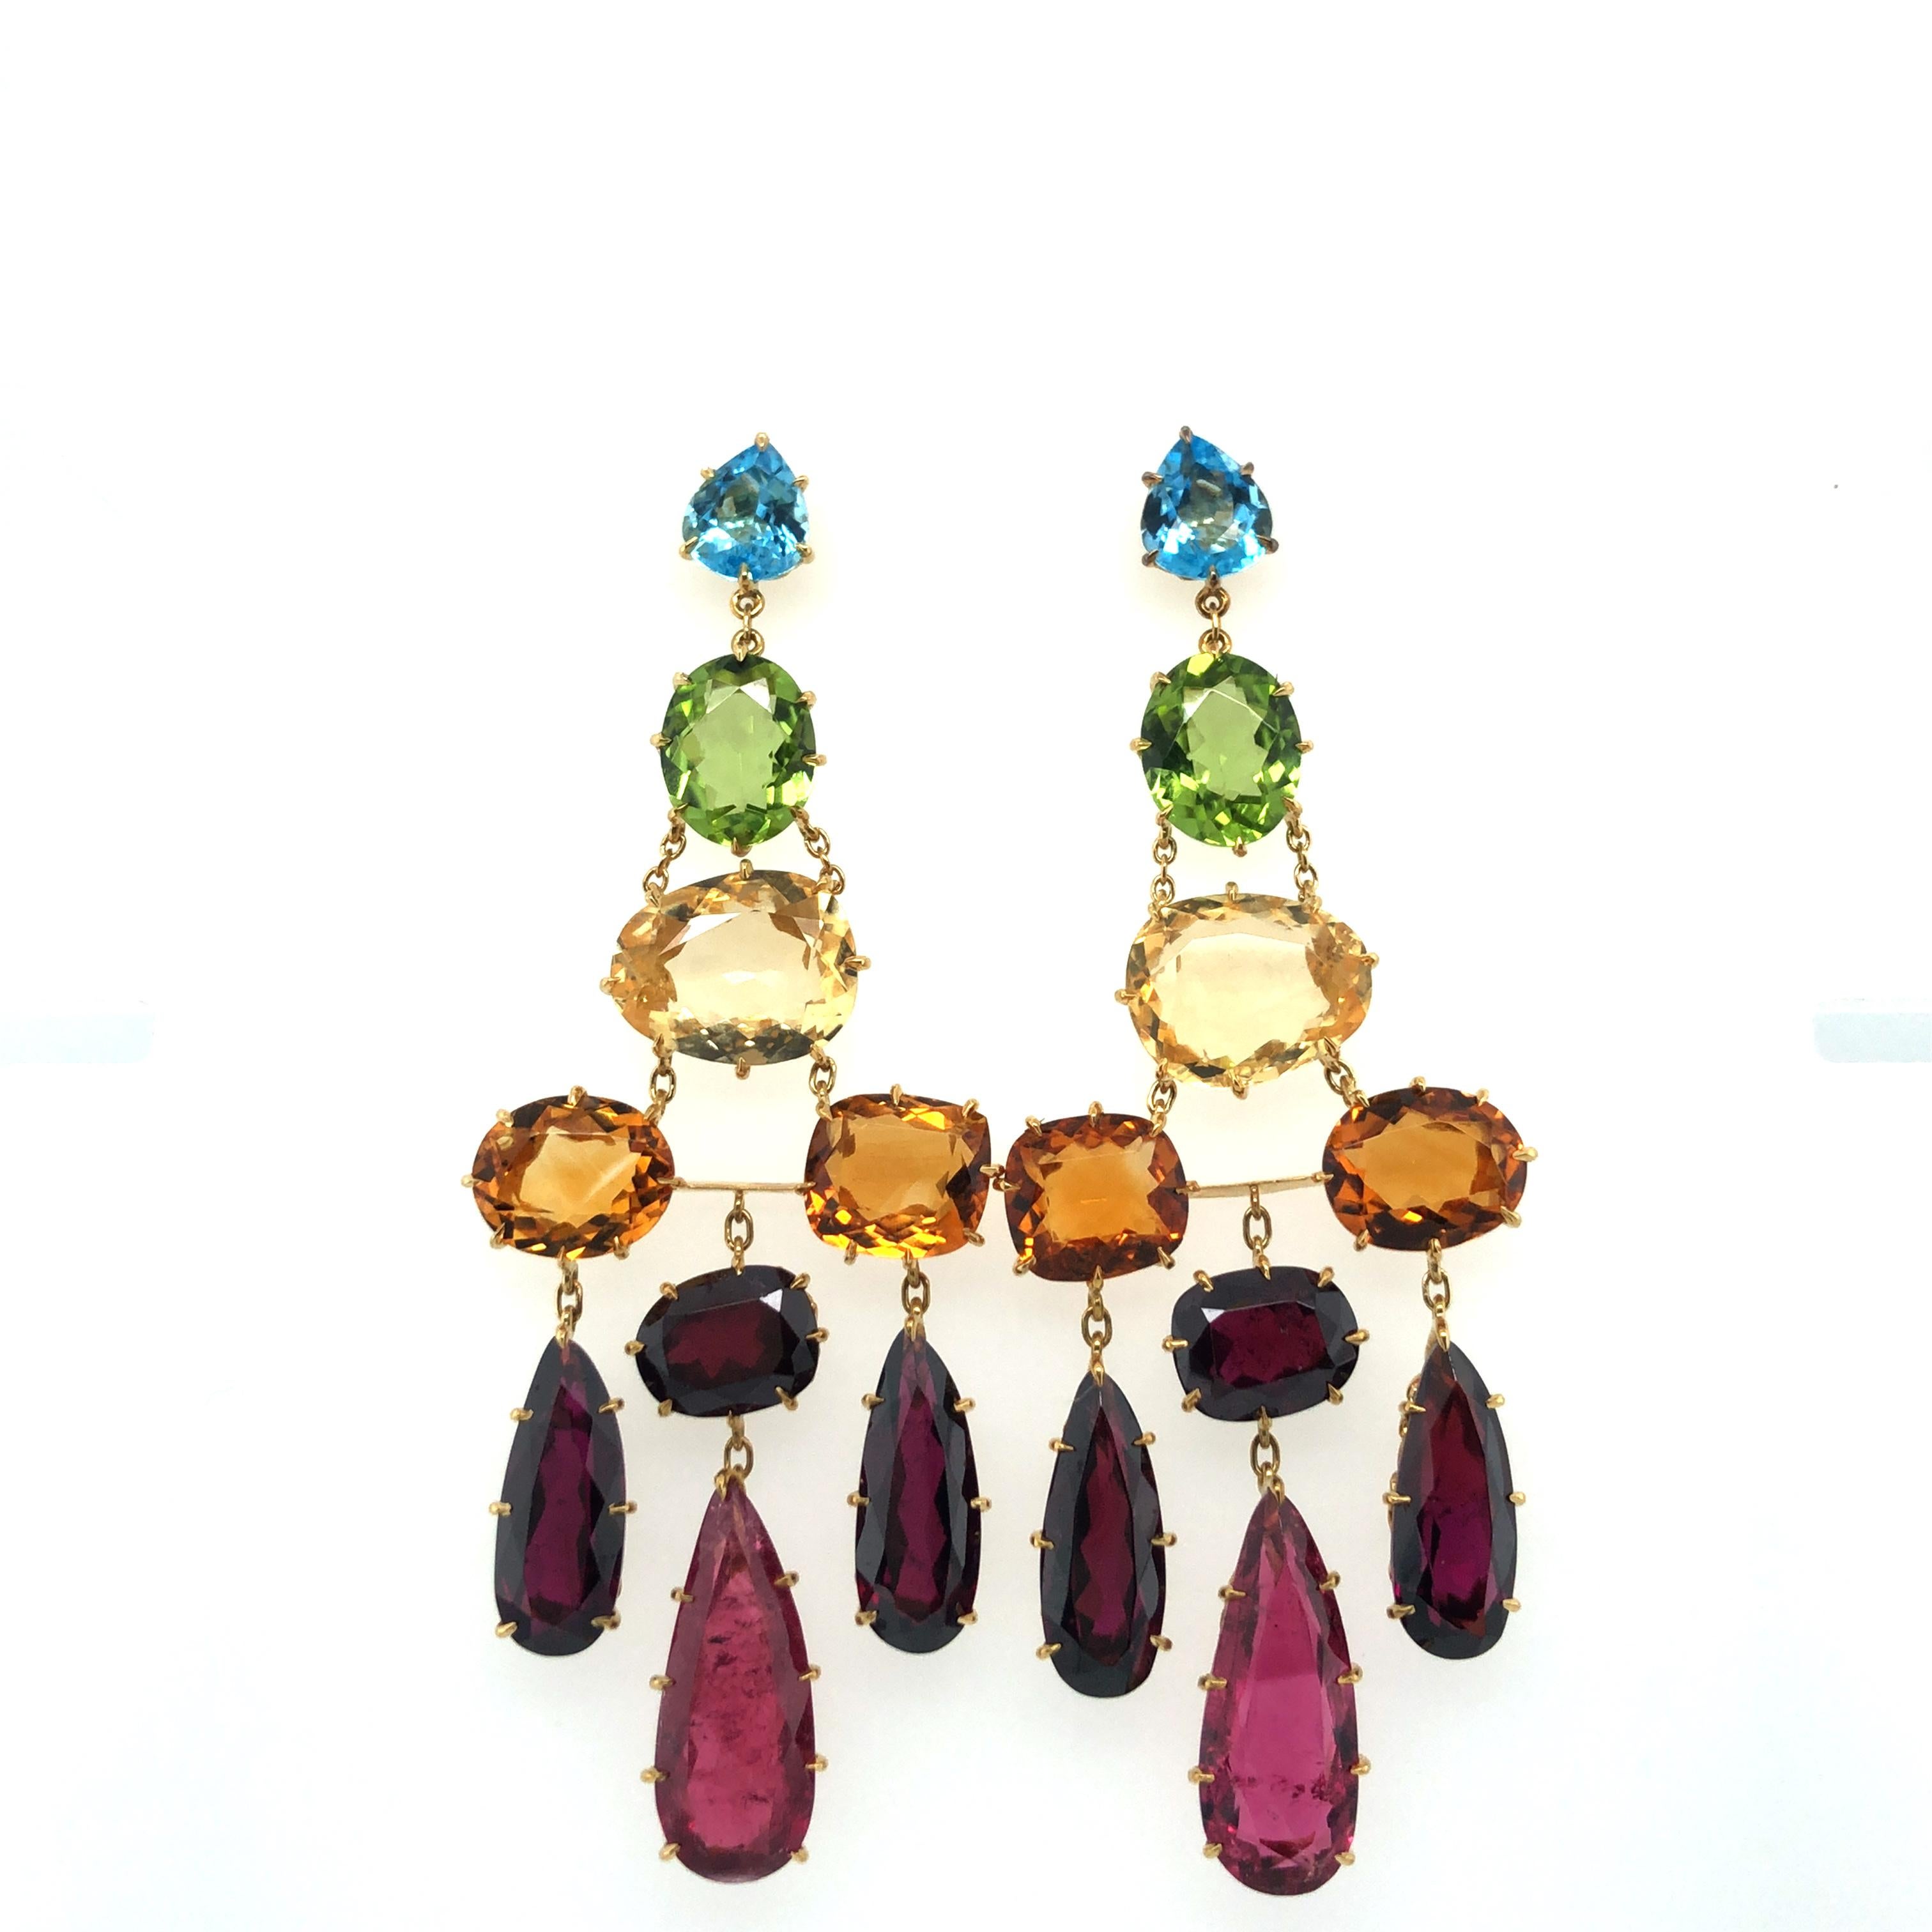 Stunning pair of earstuds from reknown Brazilian jeweller H. Stern's 'Primavera' collection.

These bold and colourful earstuds in 18 karat yellow gold are prong-set with 18 coloured gemstones in varying sizes and shapes: 6 cushion-shaped citrines